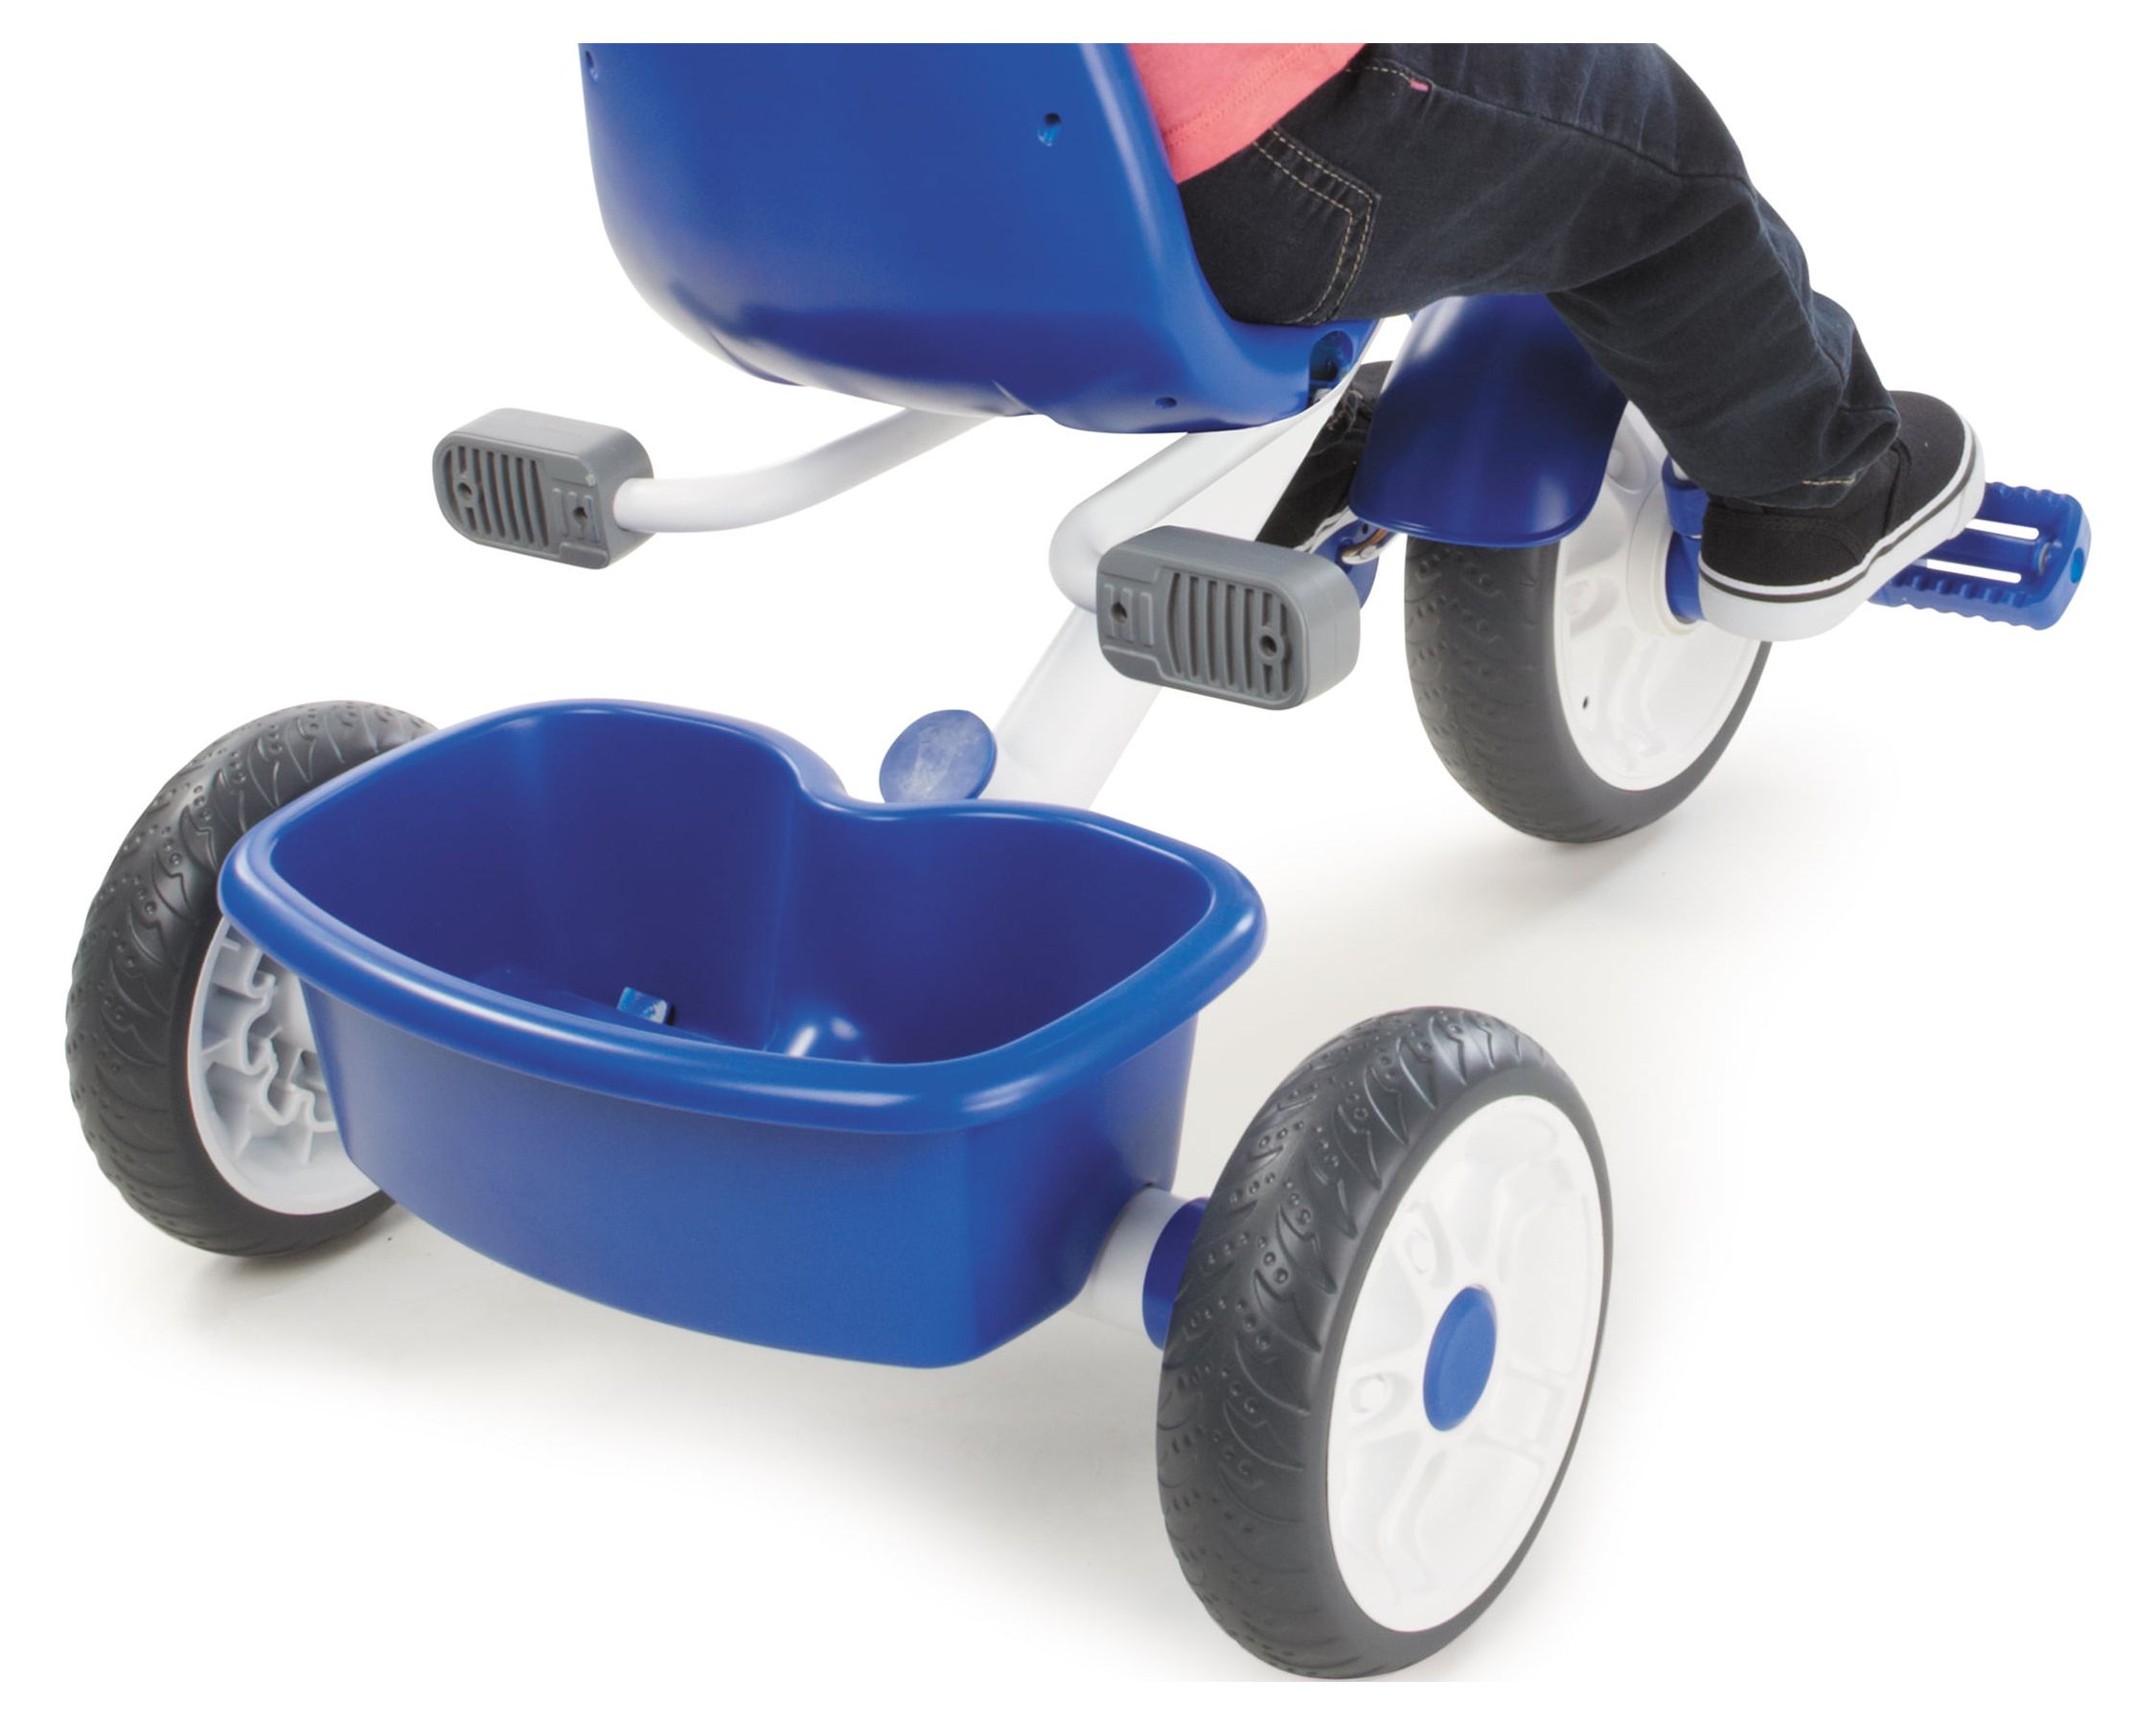 Little Tikes My First Trike 4-in-1 Trike, Blue, Convertible Tricycle, Toddlers w/ 4 Stages of Growth & Shade Canopy, Kids Boys Girls Ages 9 Months to 3 Years - image 5 of 6